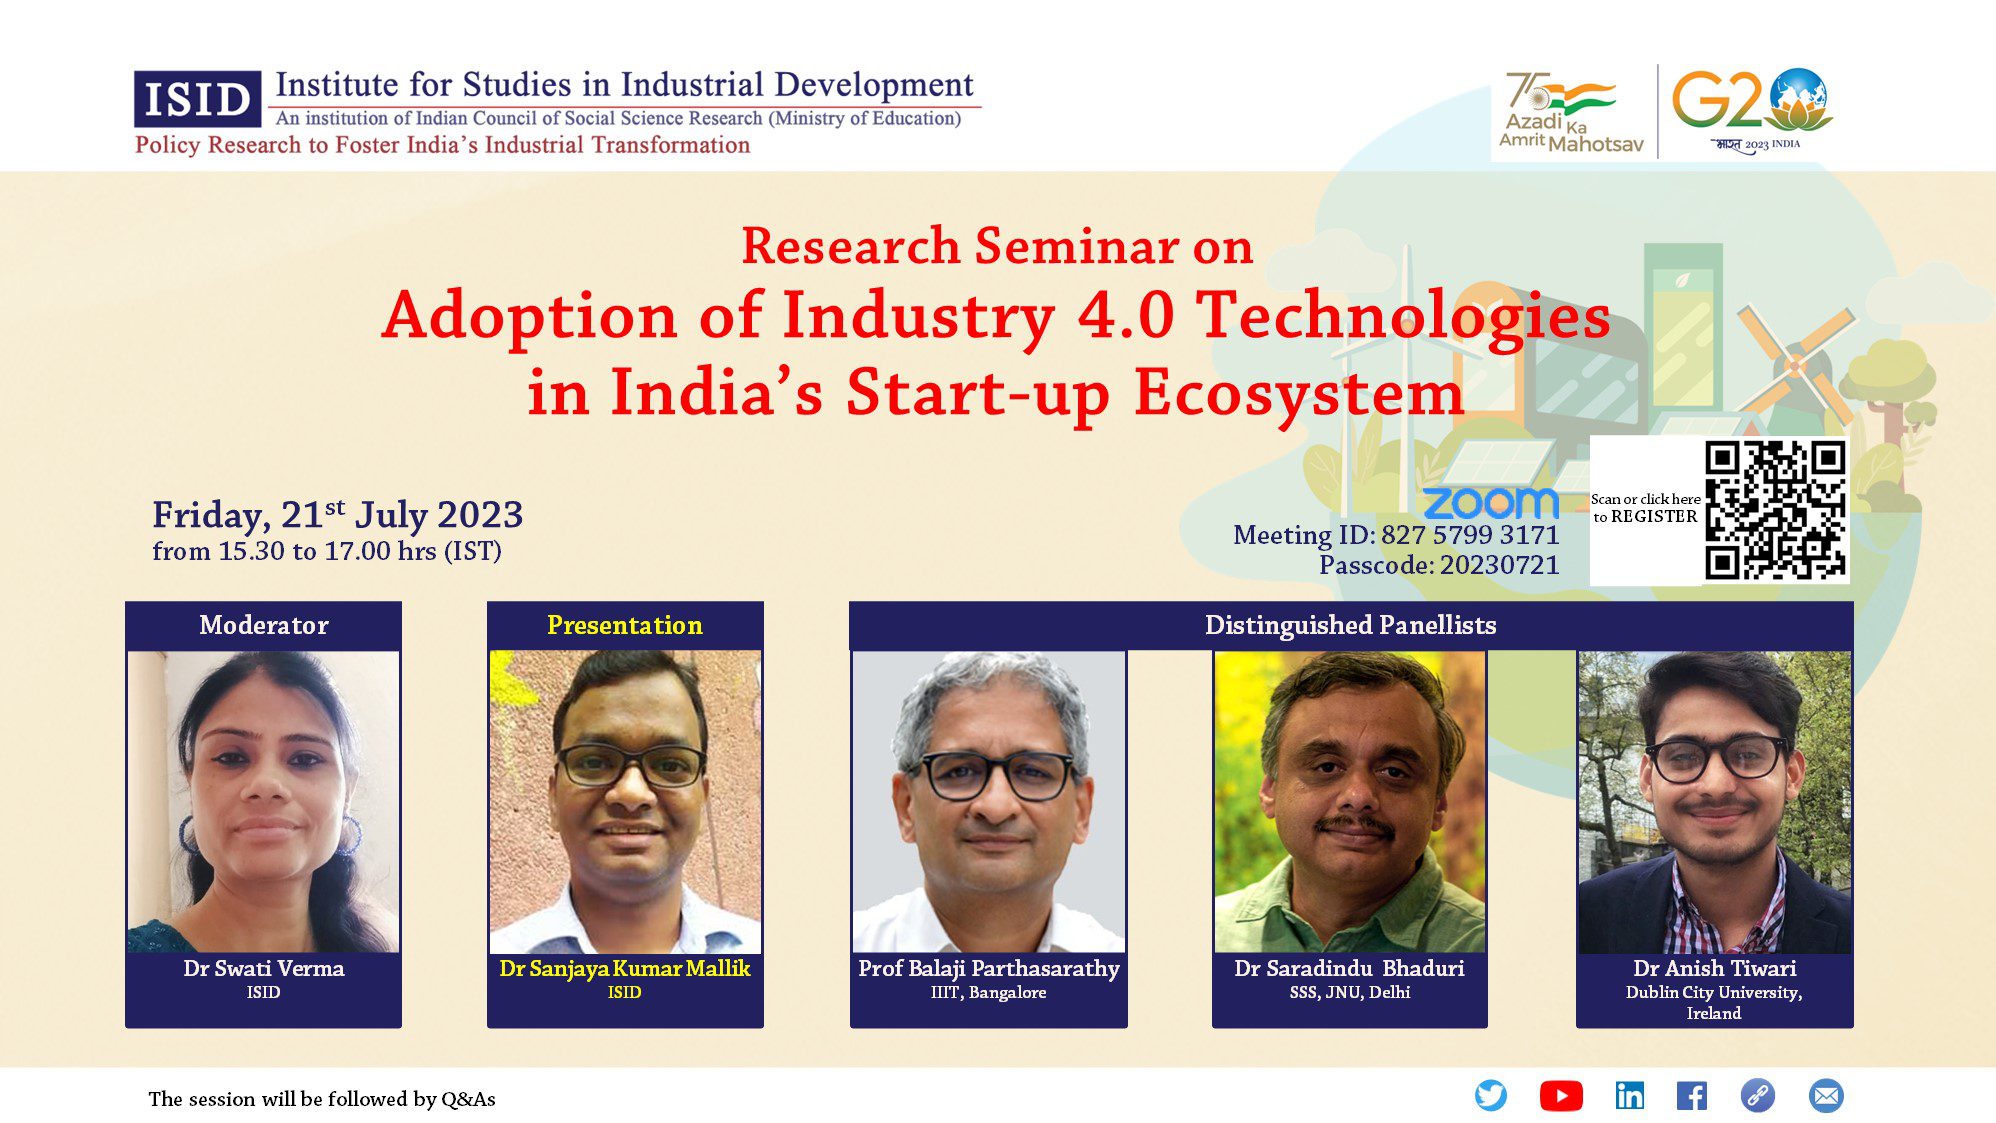 Adoption of Industry 4.0 Technologies in India’s Start-up Ecosystem